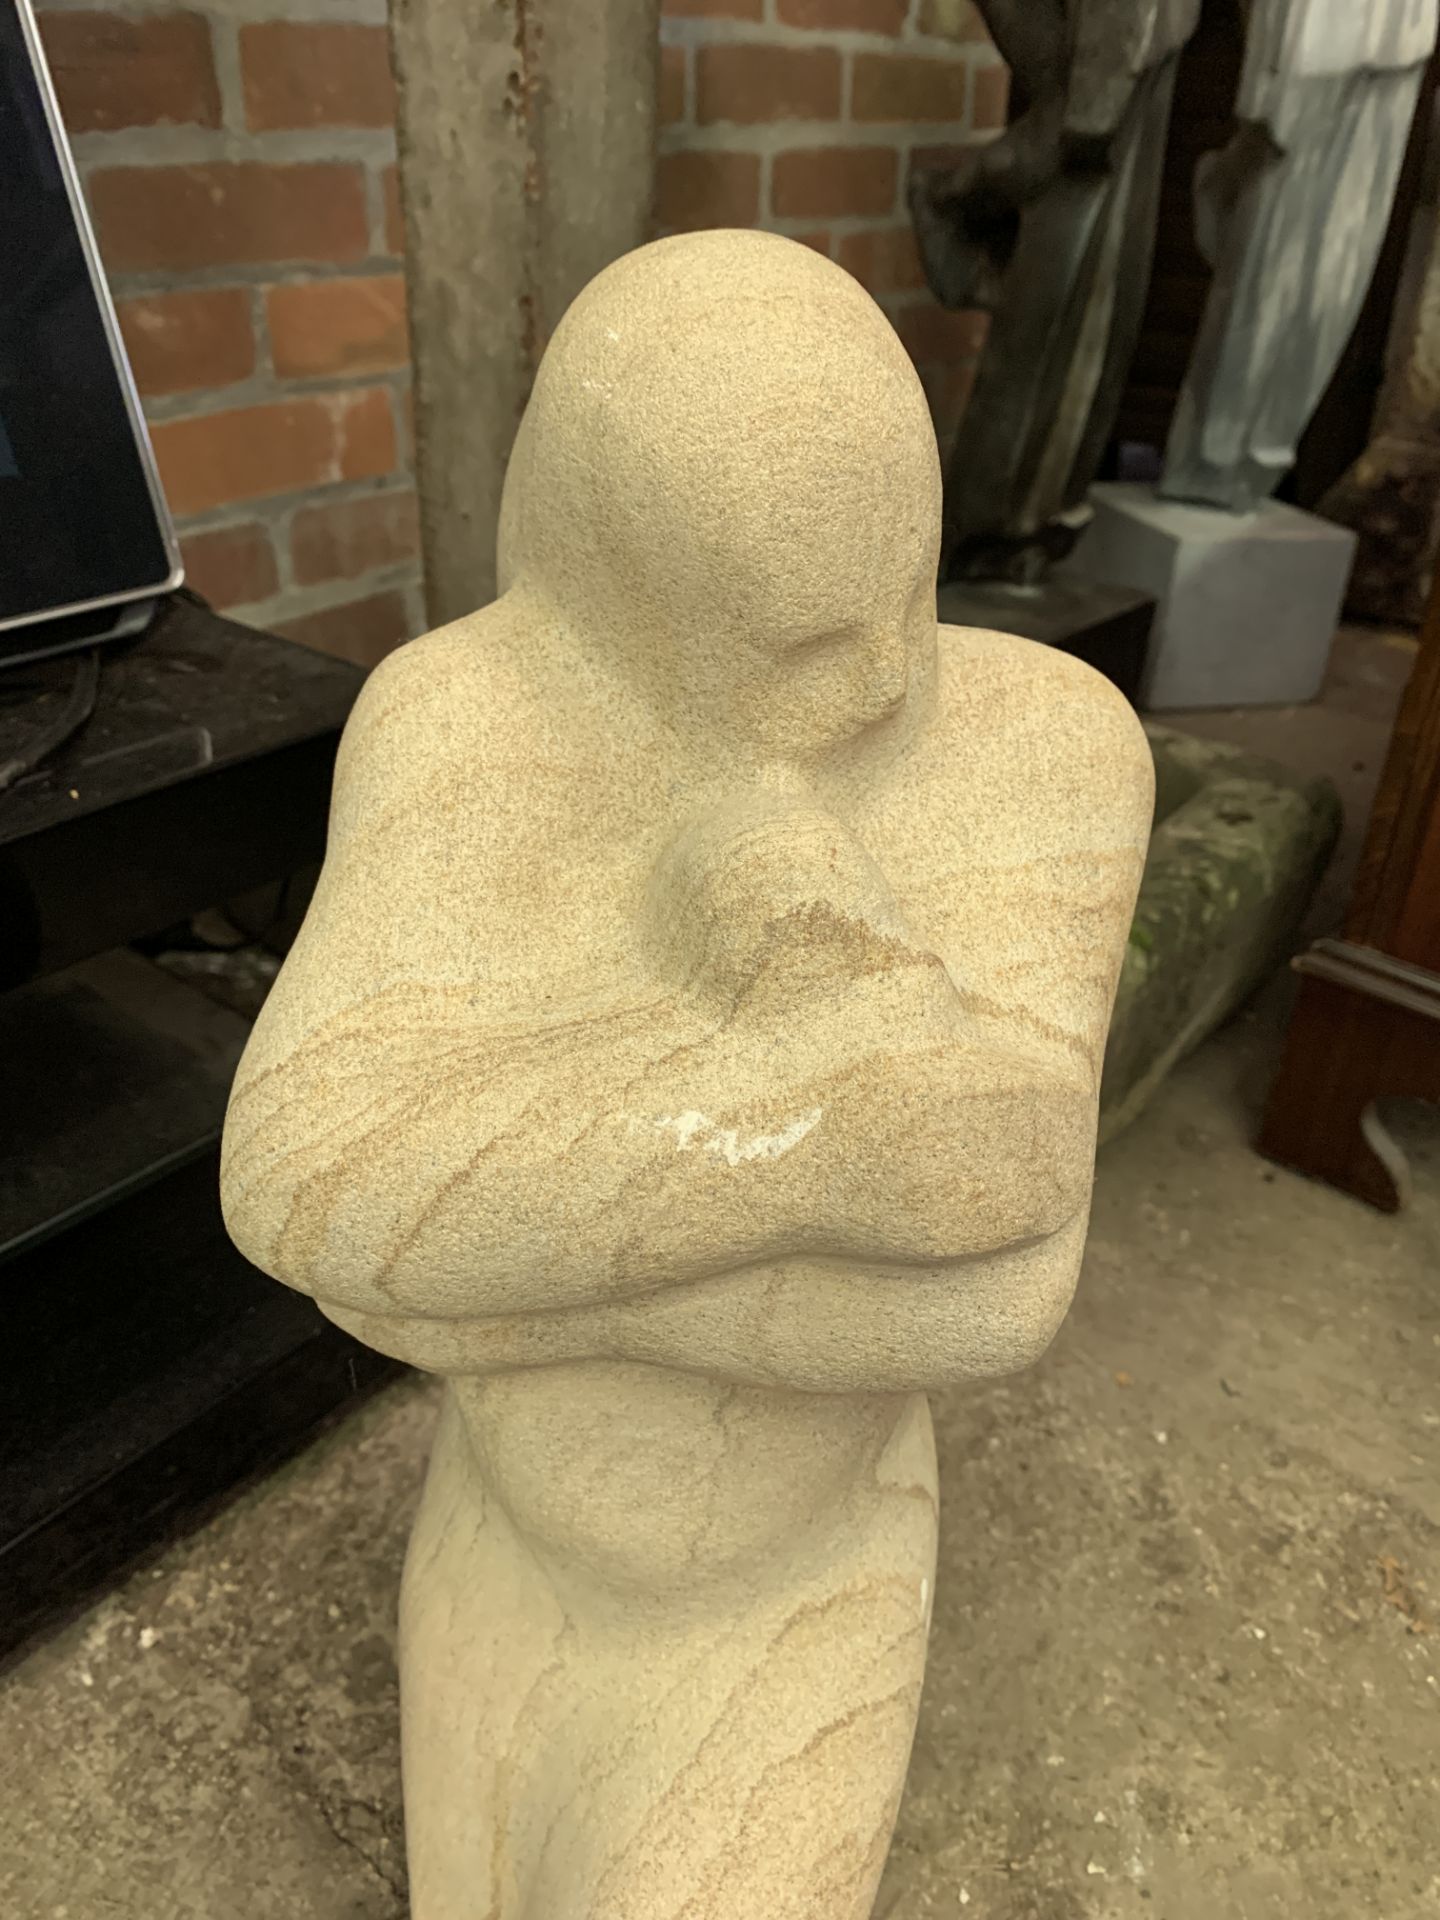 Stone sculpture of a mother and child by Fiona Goldbacher - Image 3 of 3